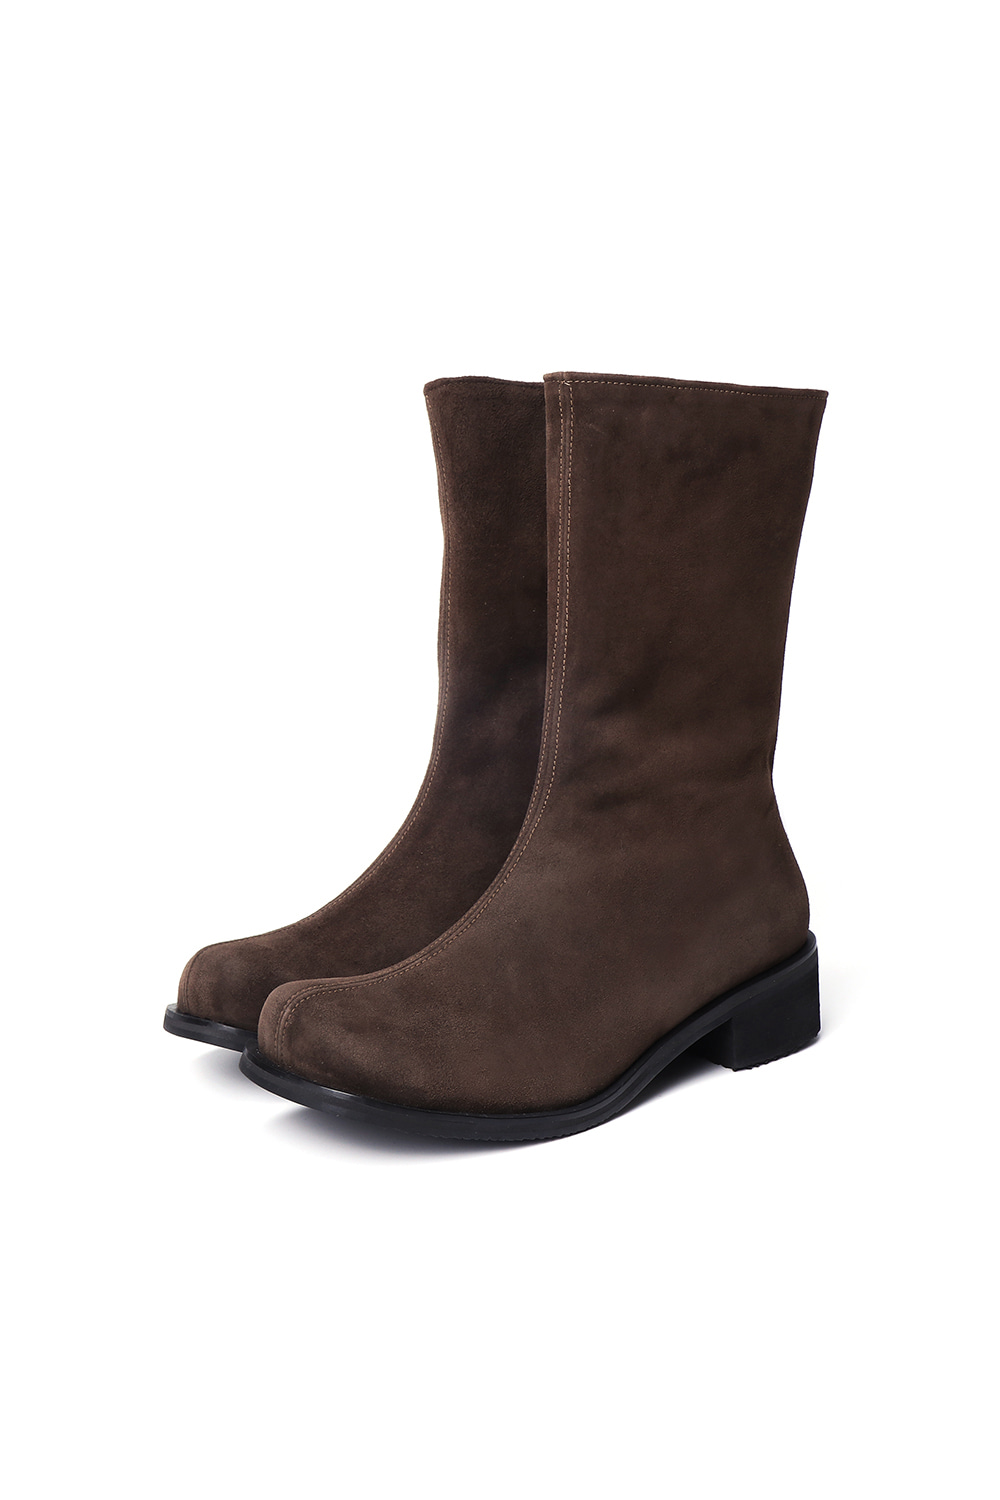 FAY MIDDLE BOOTS [SUEDE BROWN]